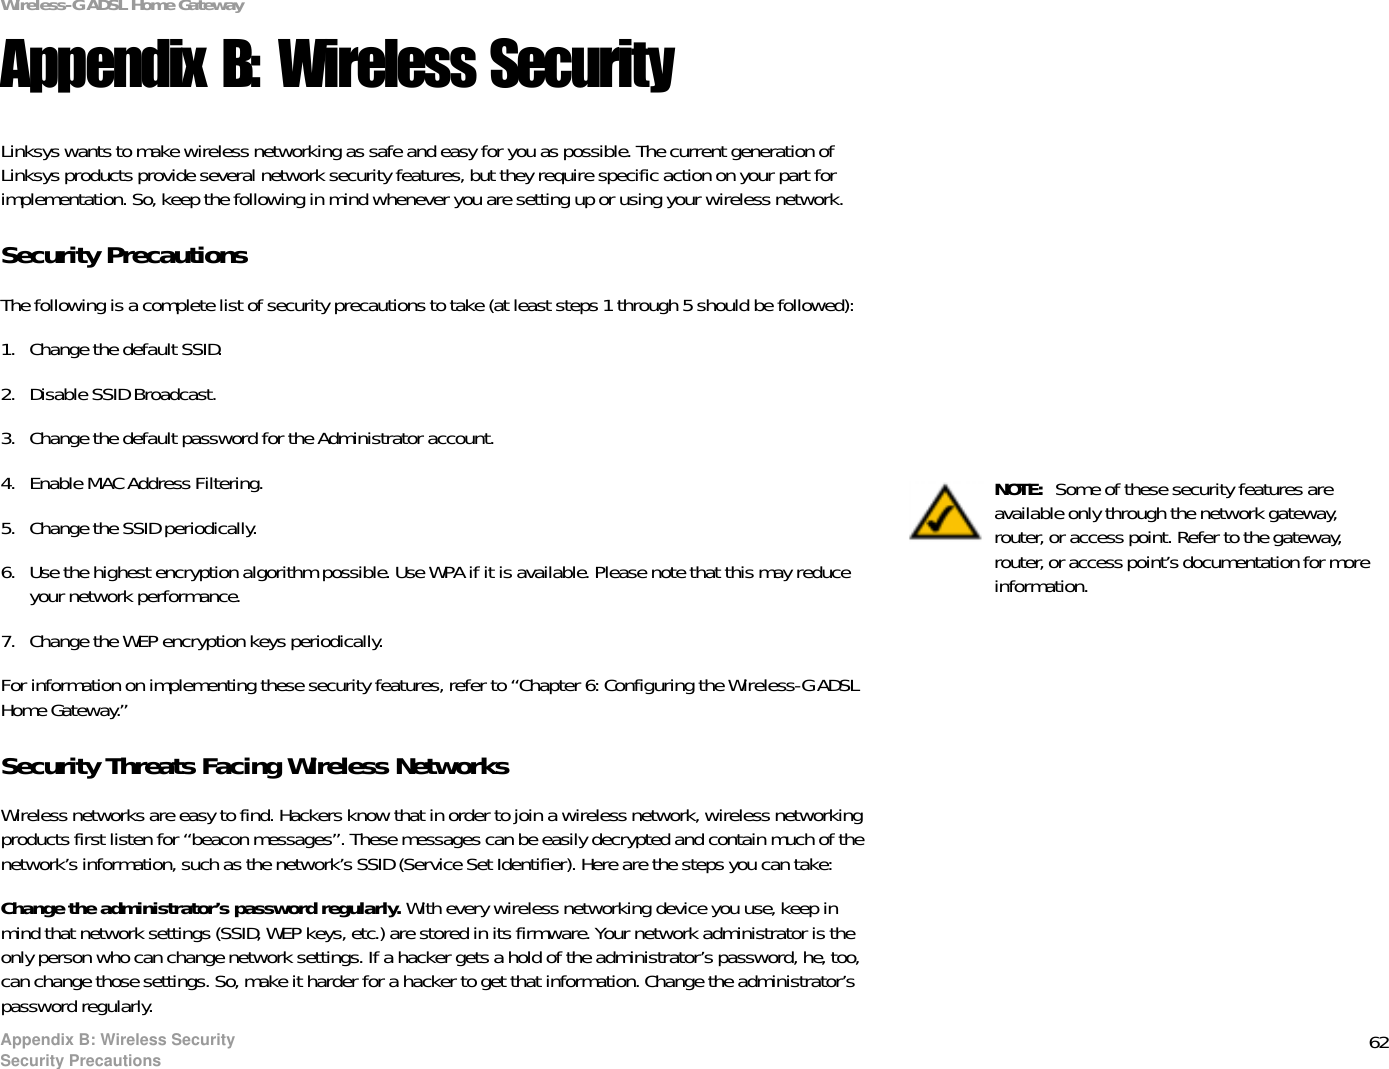 62Appendix B: Wireless SecuritySecurity PrecautionsWireless-G ADSL Home GatewayAppendix B: Wireless SecurityLinksys wants to make wireless networking as safe and easy for you as possible. The current generation of Linksys products provide several network security features, but they require specific action on your part for implementation. So, keep the following in mind whenever you are setting up or using your wireless network.Security PrecautionsThe following is a complete list of security precautions to take (at least steps 1 through 5 should be followed):1. Change the default SSID. 2. Disable SSID Broadcast. 3. Change the default password for the Administrator account. 4. Enable MAC Address Filtering. 5. Change the SSID periodically. 6. Use the highest encryption algorithm possible. Use WPA if it is available. Please note that this may reduce your network performance. 7. Change the WEP encryption keys periodically. For information on implementing these security features, refer to “Chapter 6: Configuring the Wireless-G ADSL Home Gateway.”Security Threats Facing Wireless Networks Wireless networks are easy to find. Hackers know that in order to join a wireless network, wireless networking products first listen for “beacon messages”. These messages can be easily decrypted and contain much of the network’s information, such as the network’s SSID (Service Set Identifier). Here are the steps you can take:Change the administrator’s password regularly. With every wireless networking device you use, keep in mind that network settings (SSID, WEP keys, etc.) are stored in its firmware. Your network administrator is the only person who can change network settings. If a hacker gets a hold of the administrator’s password, he, too, can change those settings. So, make it harder for a hacker to get that information. Change the administrator’s password regularly.NOTE:  Some of these security features are available only through the network gateway, router, or access point. Refer to the gateway, router, or access point’s documentation for more information.